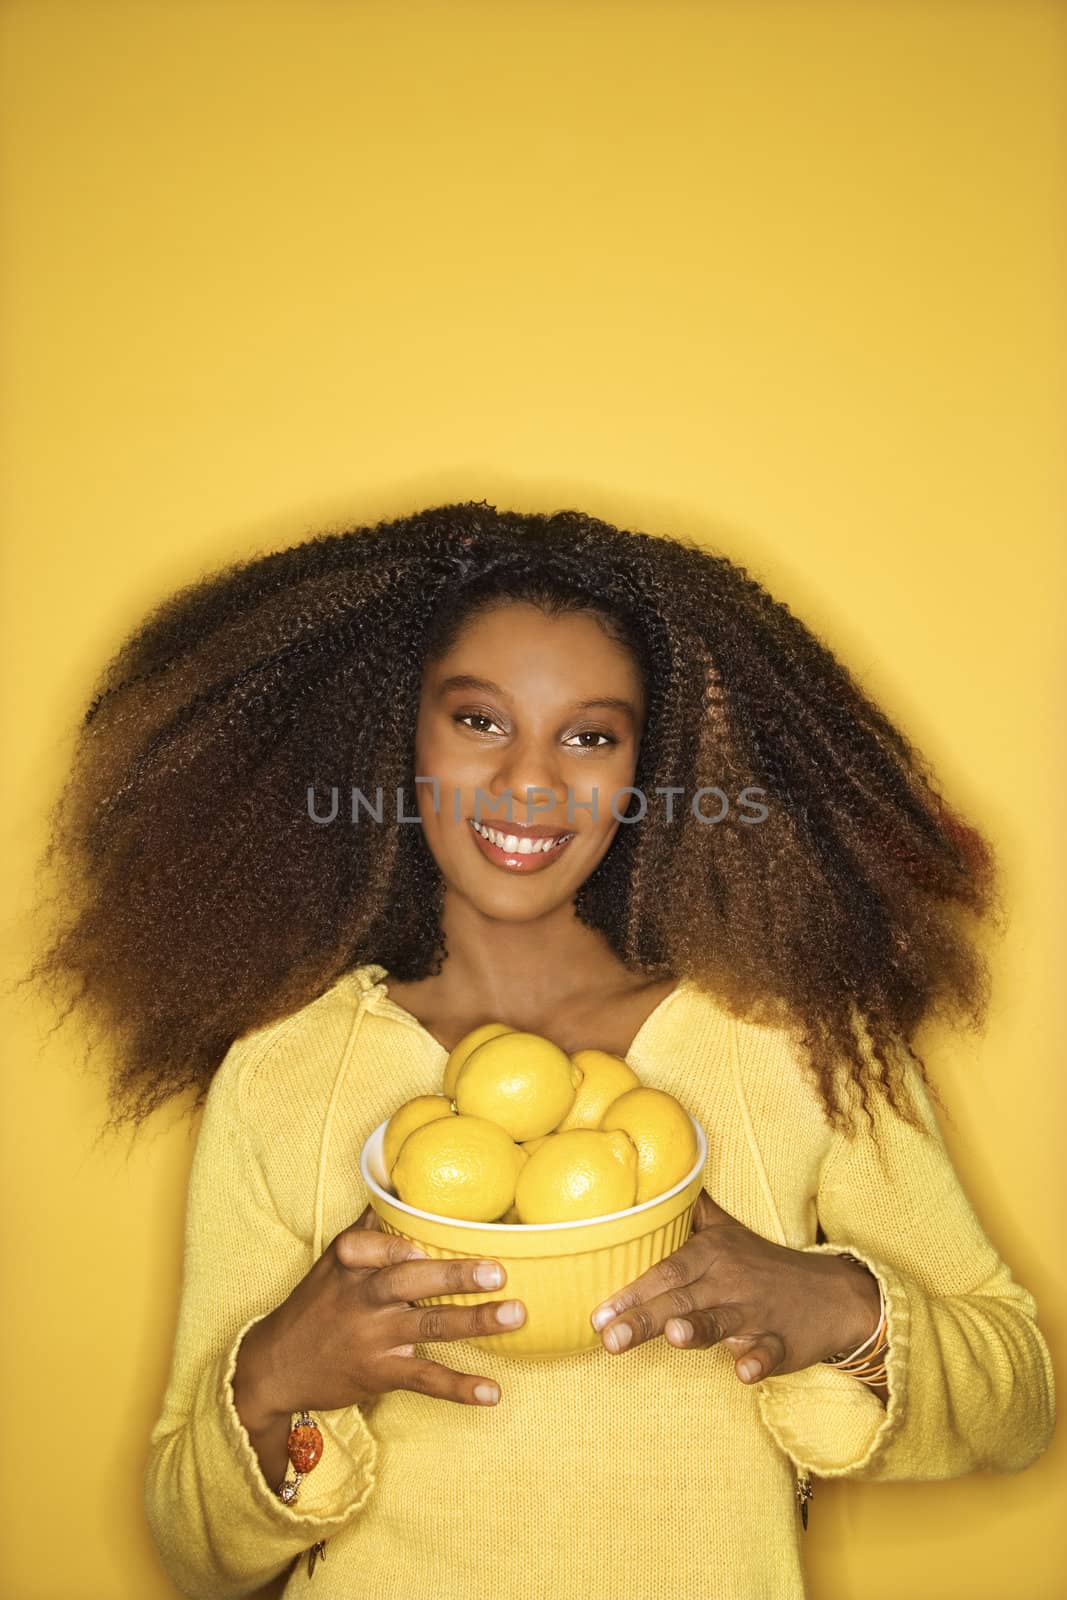 Portrait of young African-American adult woman smiling pleasantly against yellow background holding bowl of lemons.